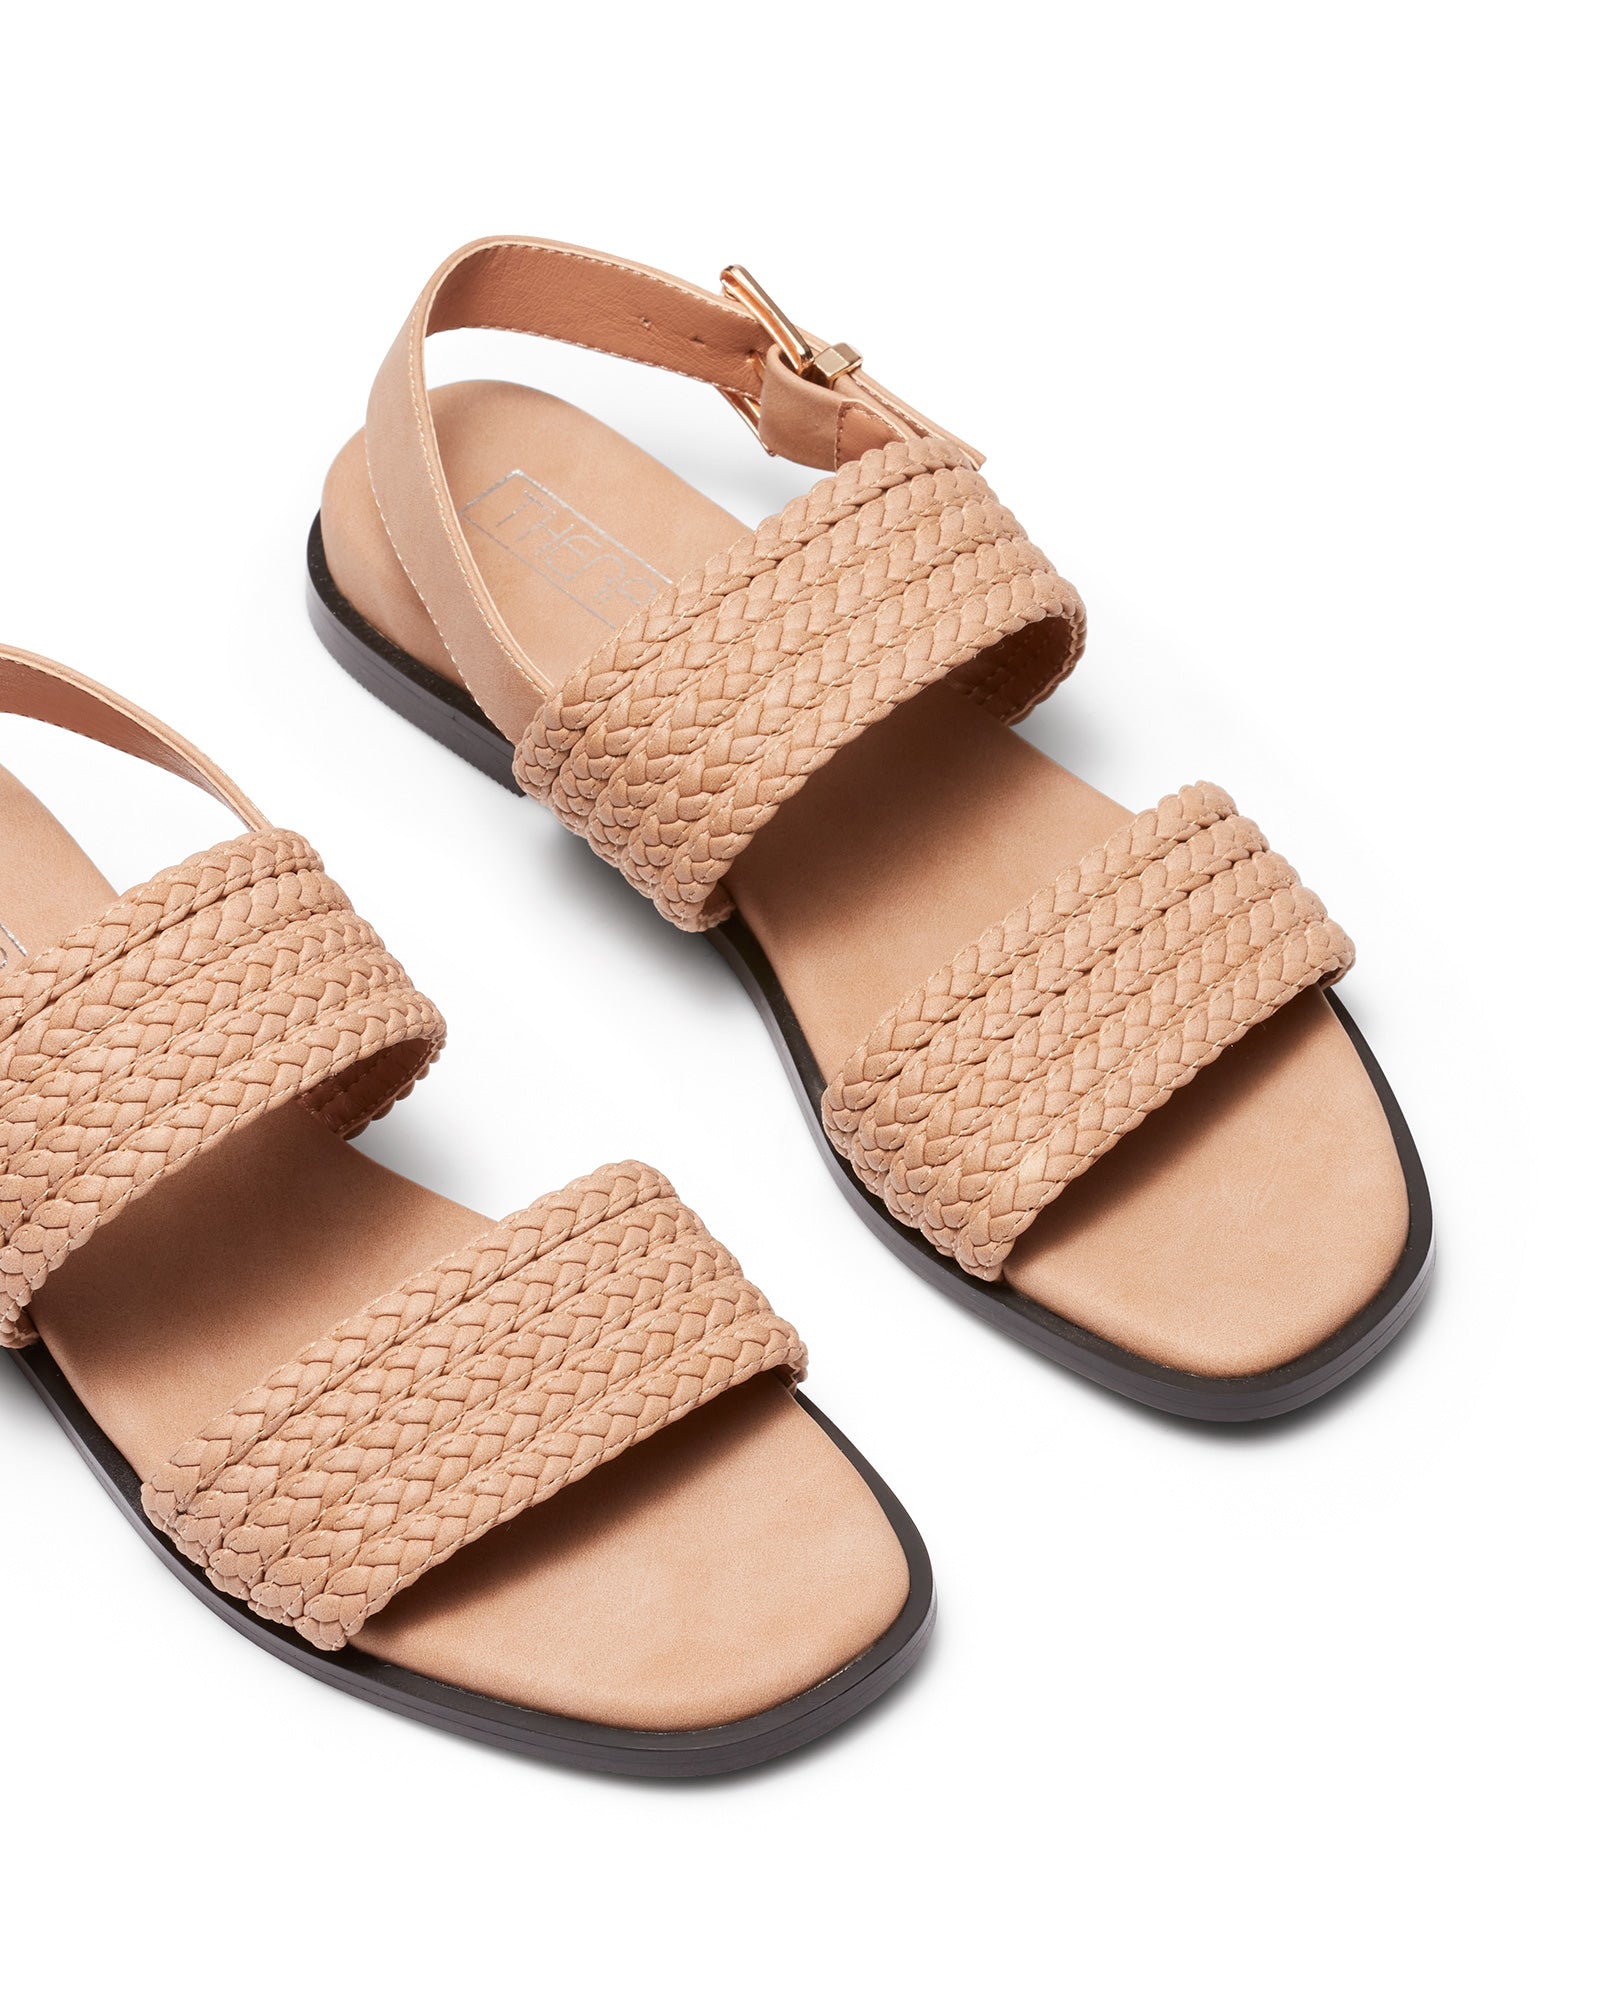 Therapy Shoes Scarlet Tan | Women's Sandals | Flats | Woven Strap